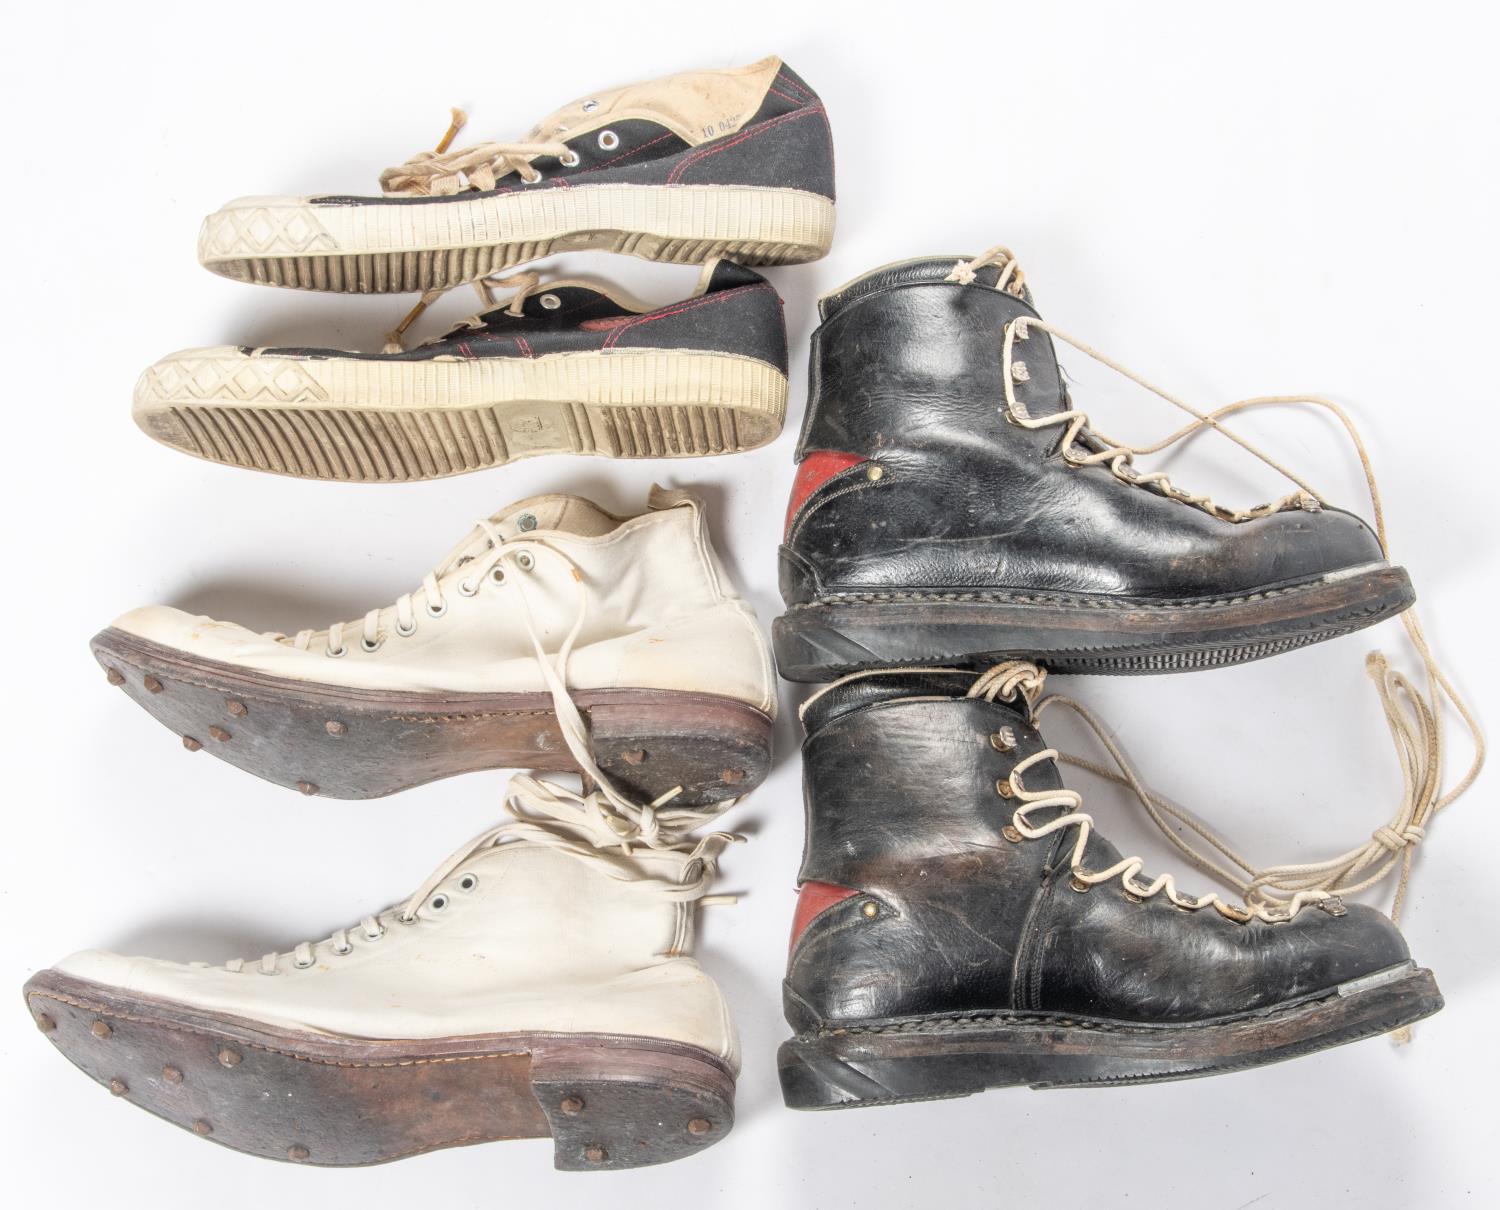 A pair of vintage ski boots; a pair of white canvas cricket boots and a pair of Elcho tennis